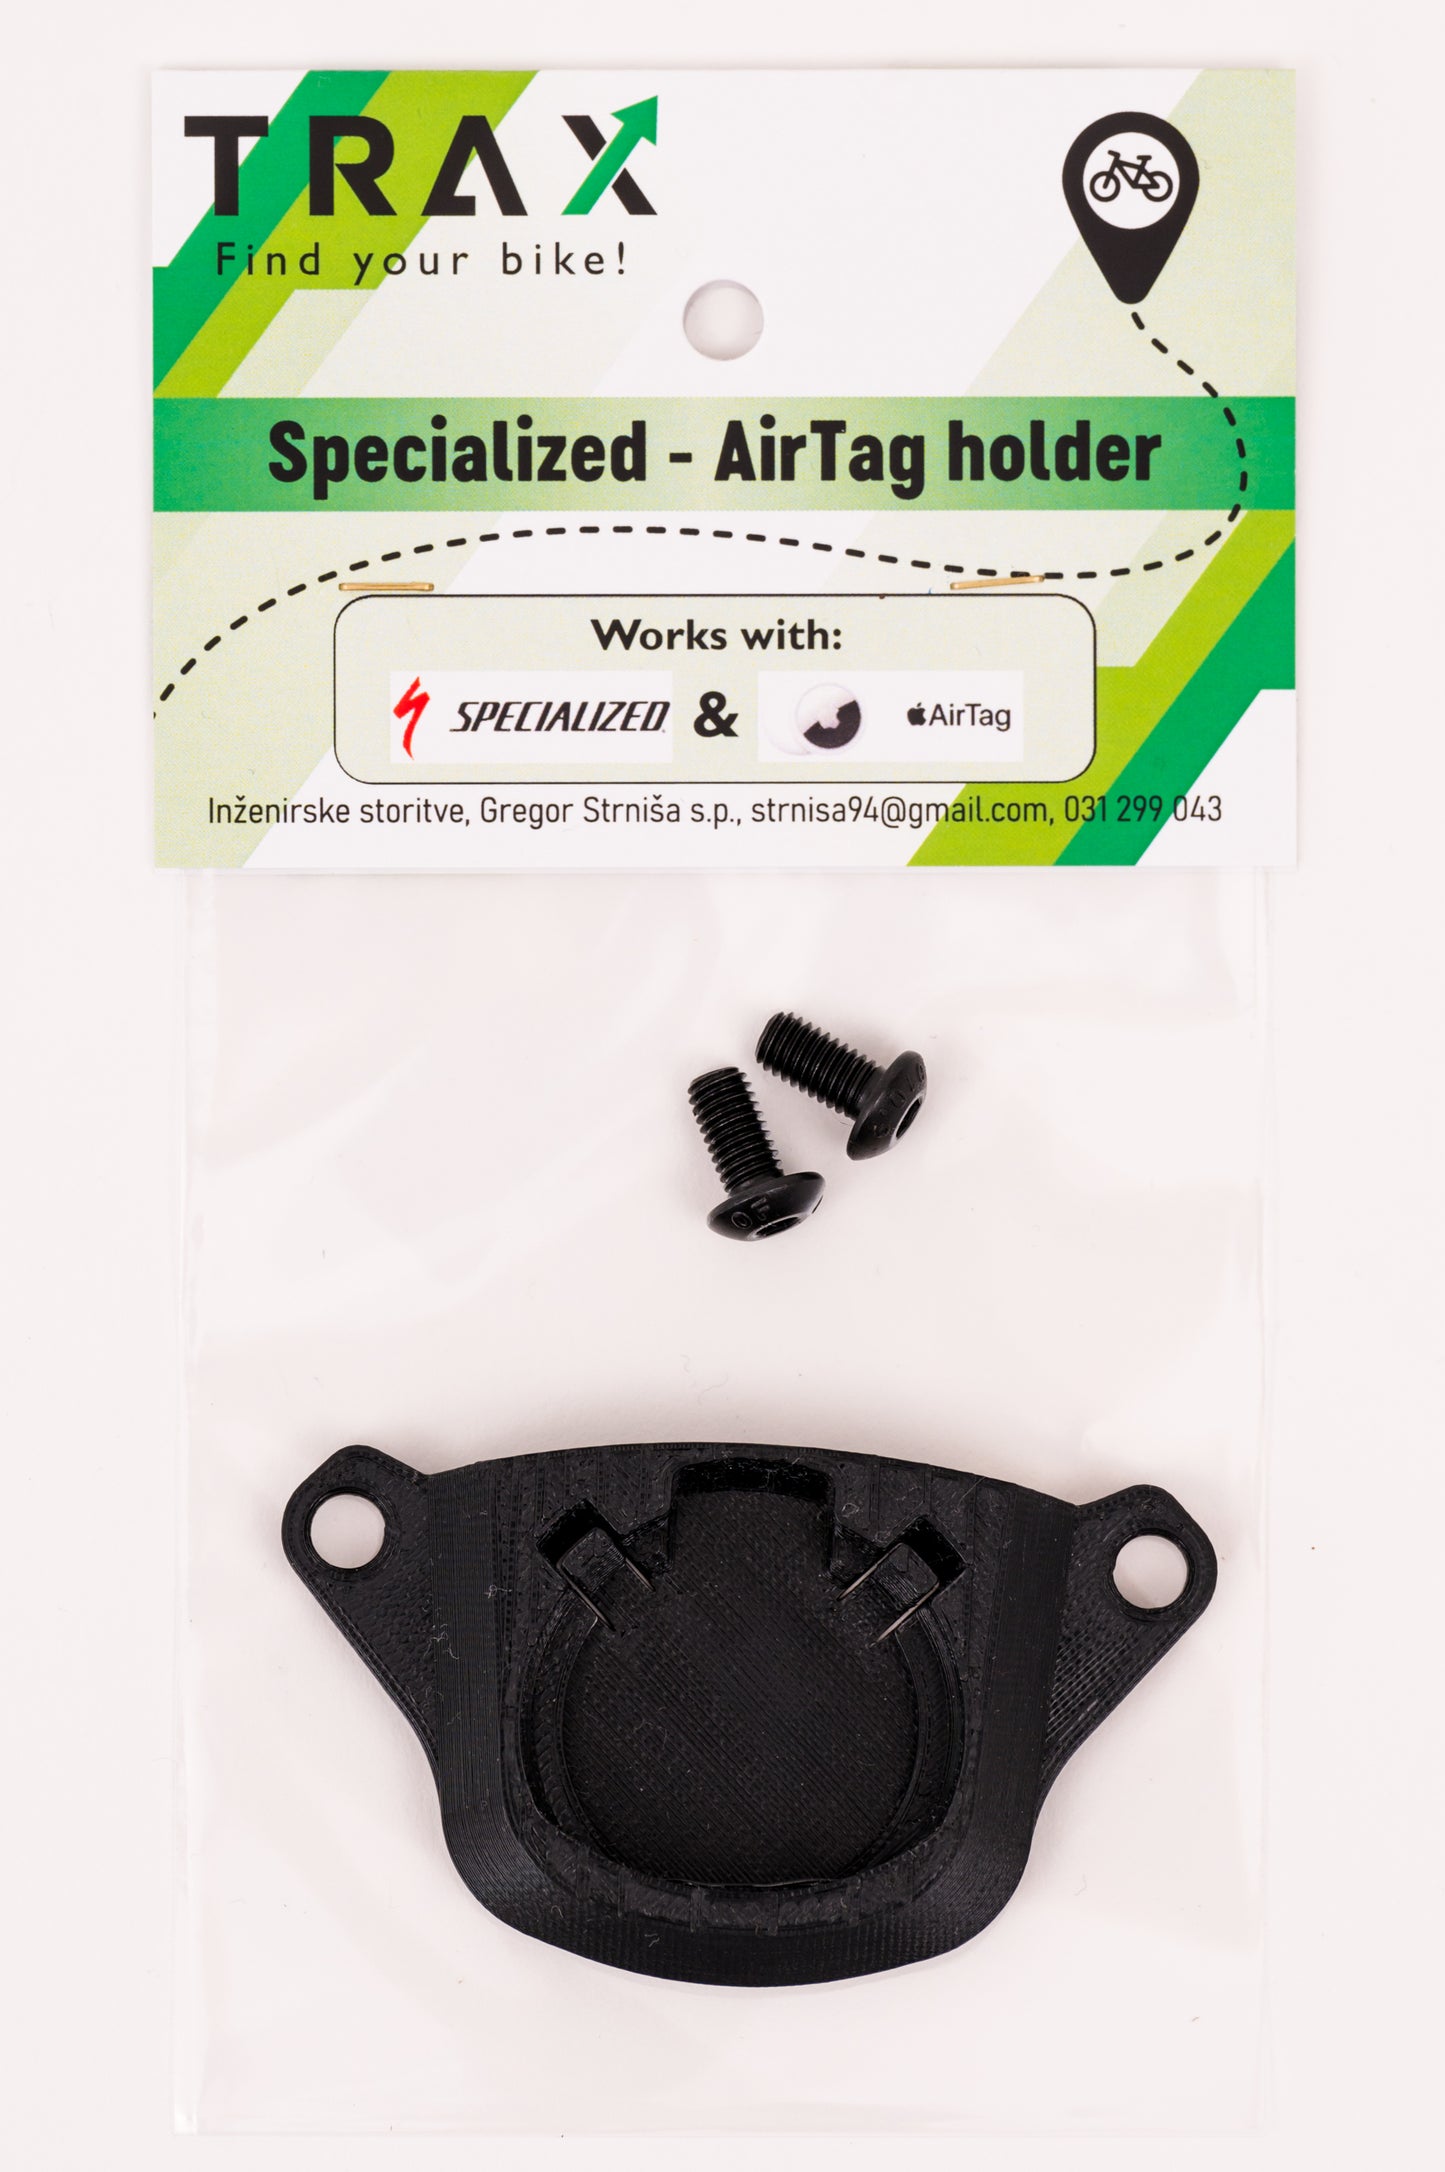 Specialized - Apple AirTag holder